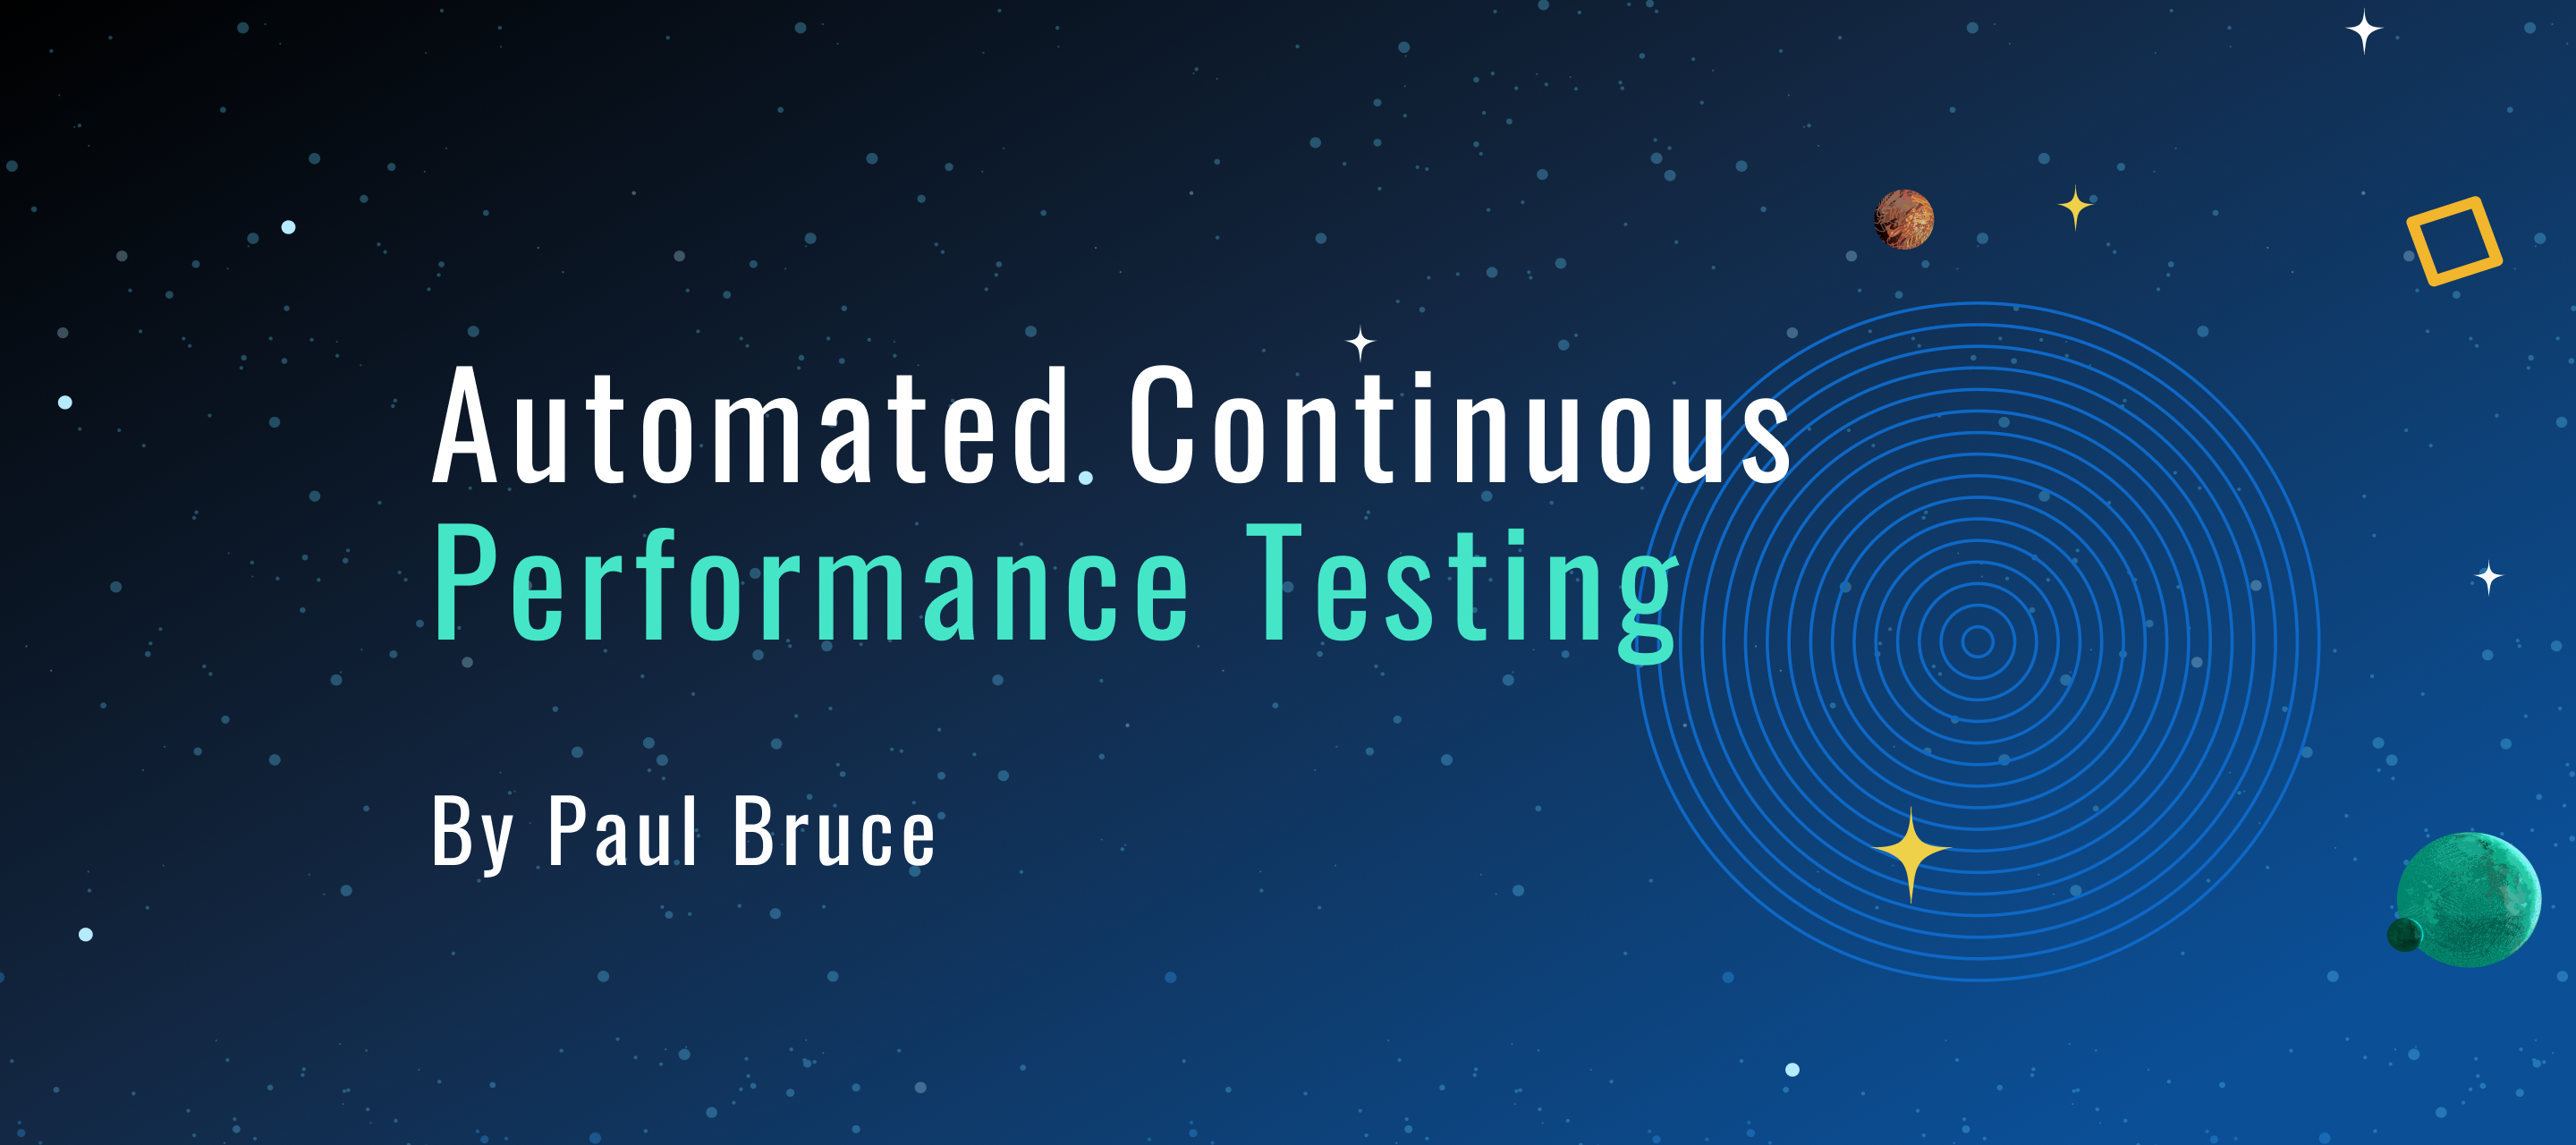 Getting started with automated continuous performance testing